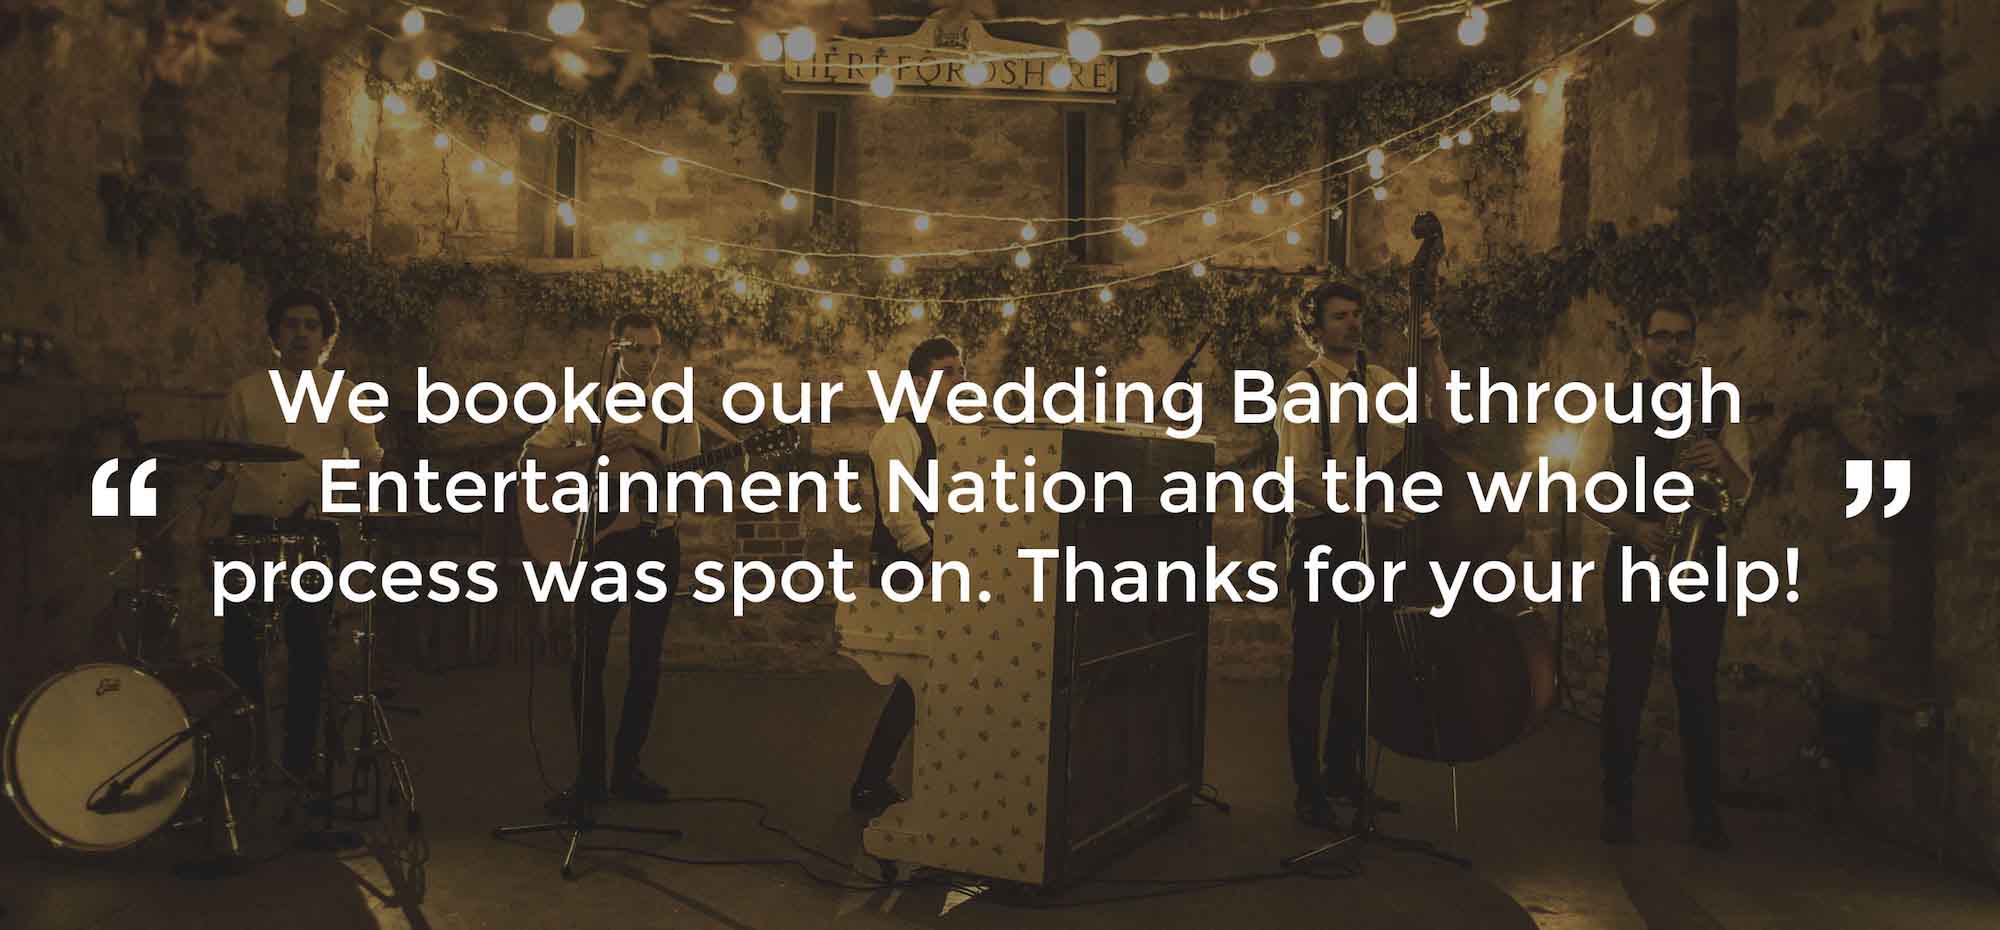 Client Review of a Wedding Band Shropshire